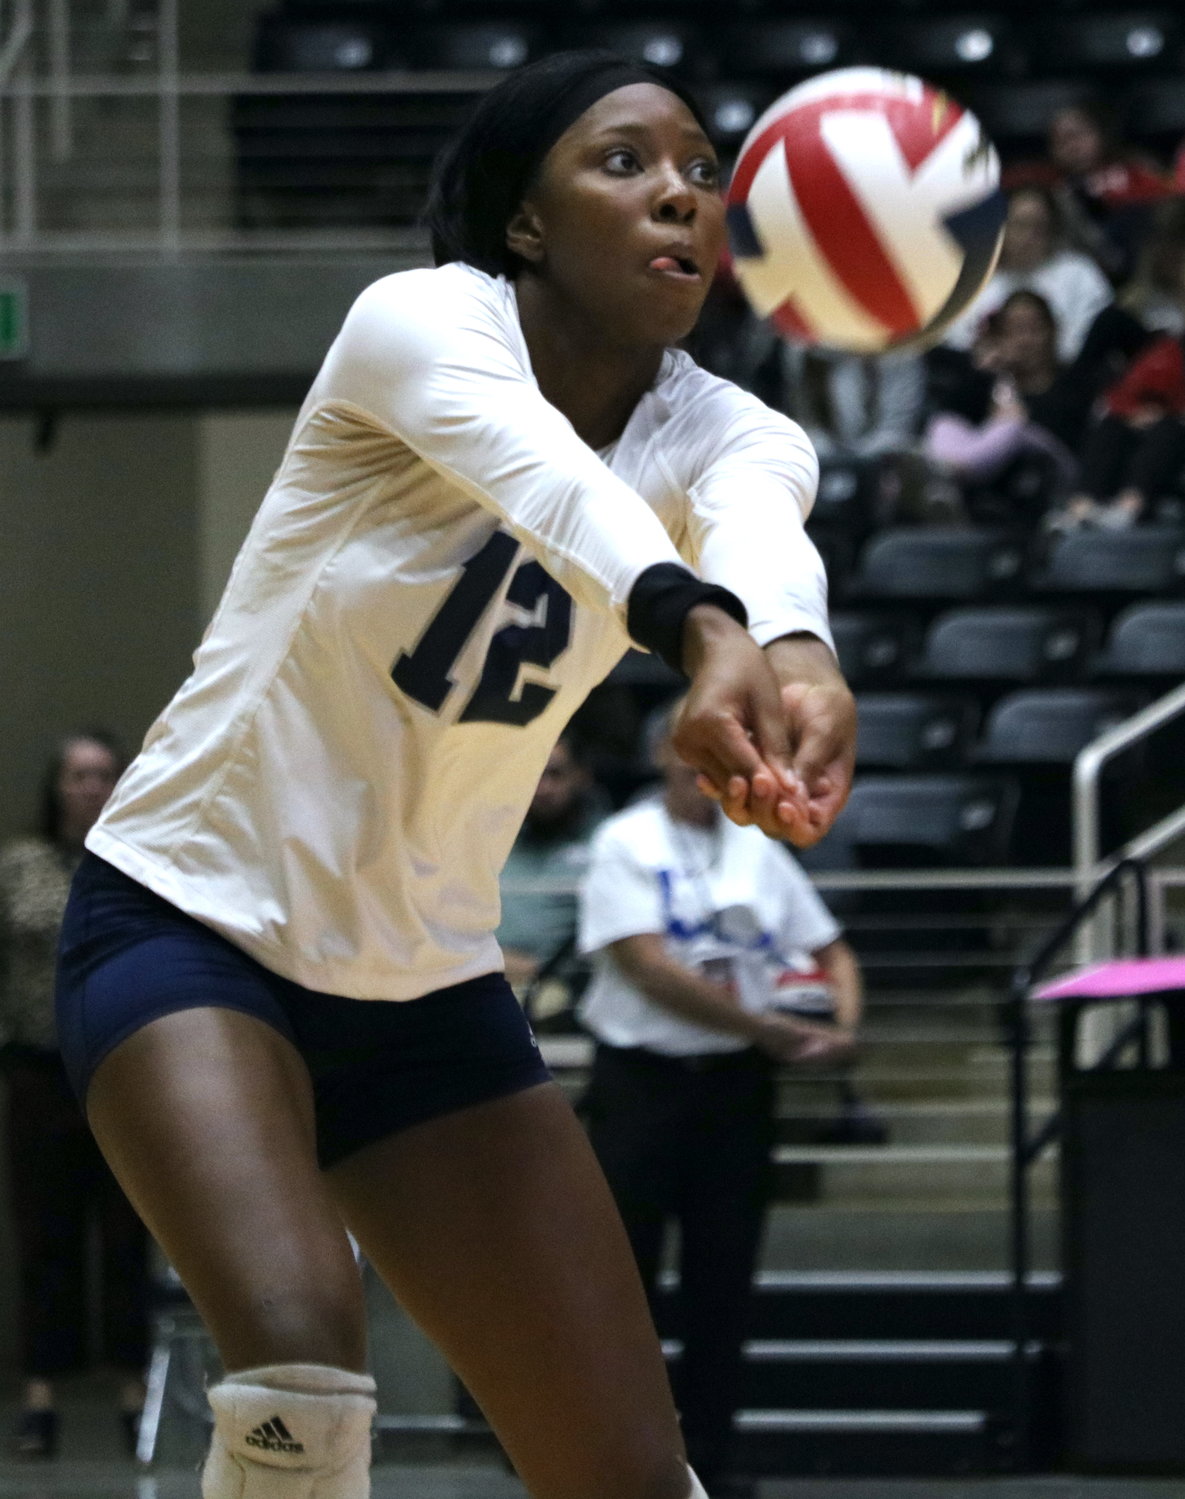 Cindy Tchouangwa digs a ball during Friday's Class 6A State Semifinal between Tompkins and Keller on Friday at the Curtis Culwell Center in Garland.